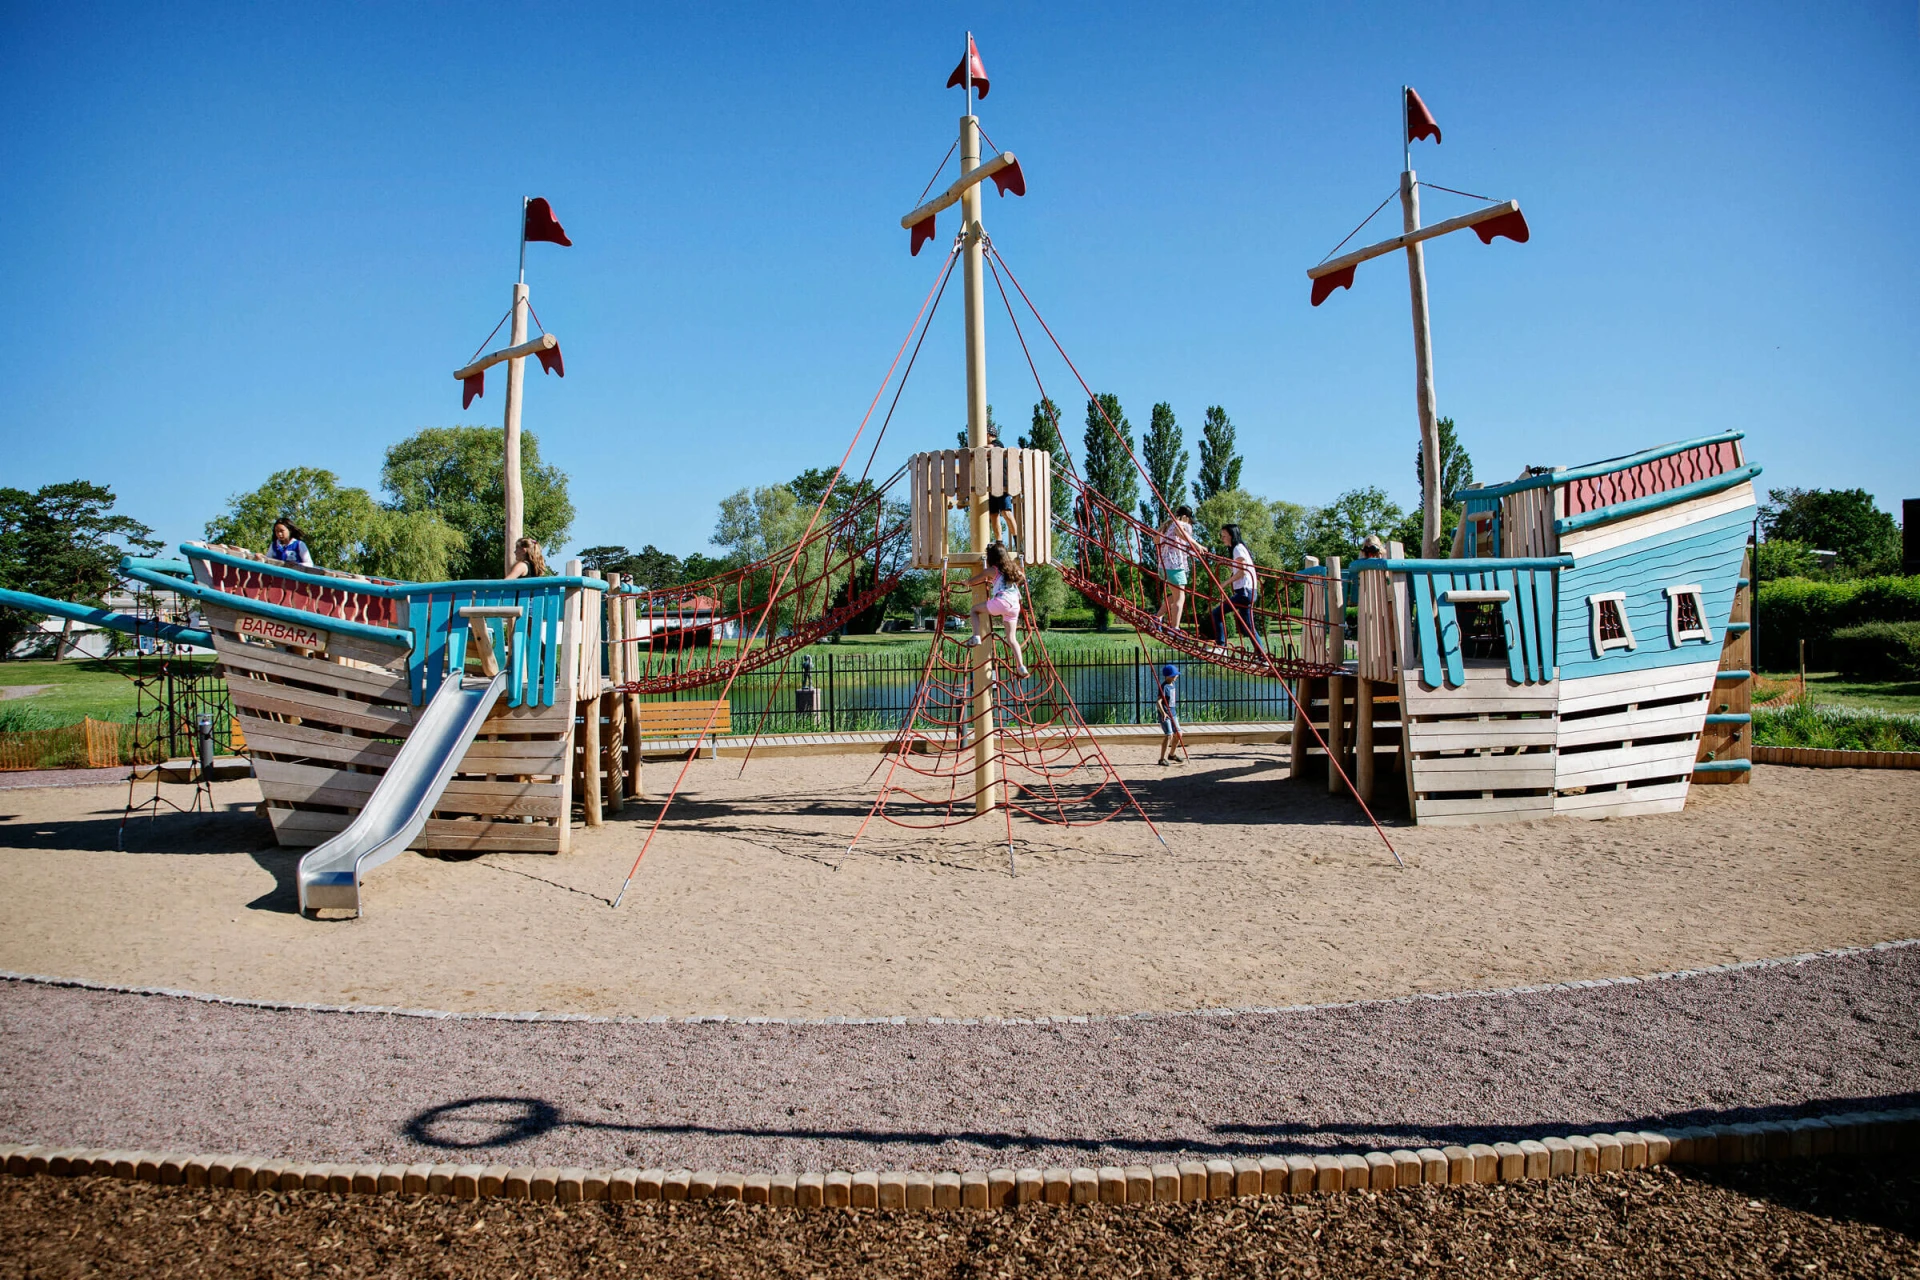  Pirate themed playground ship in Borgholm, Sweden